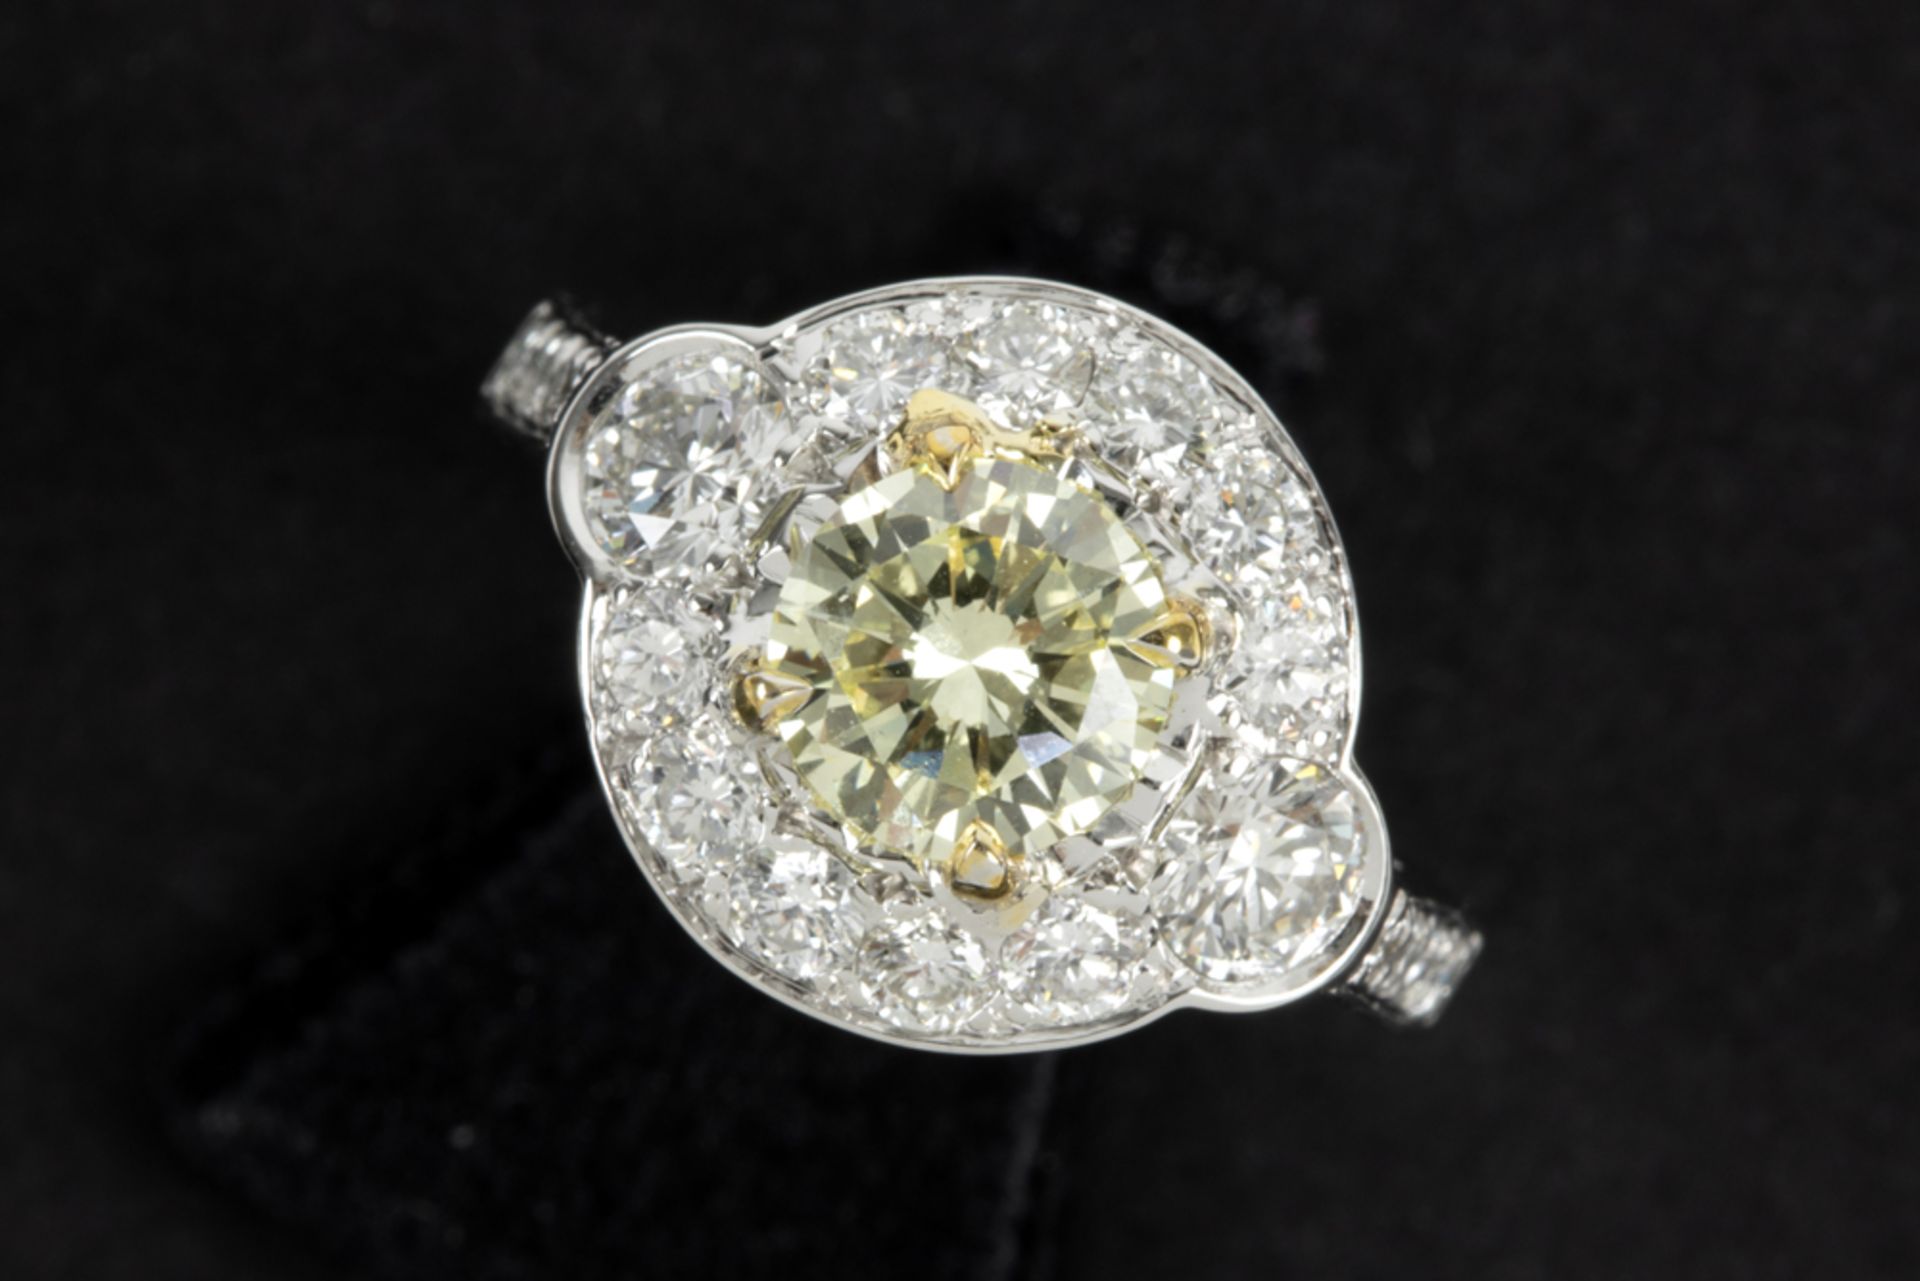 a 0,91 carat high quality fancy yellow brilliant cut diamond set in a ring in white gold (18 carat) 